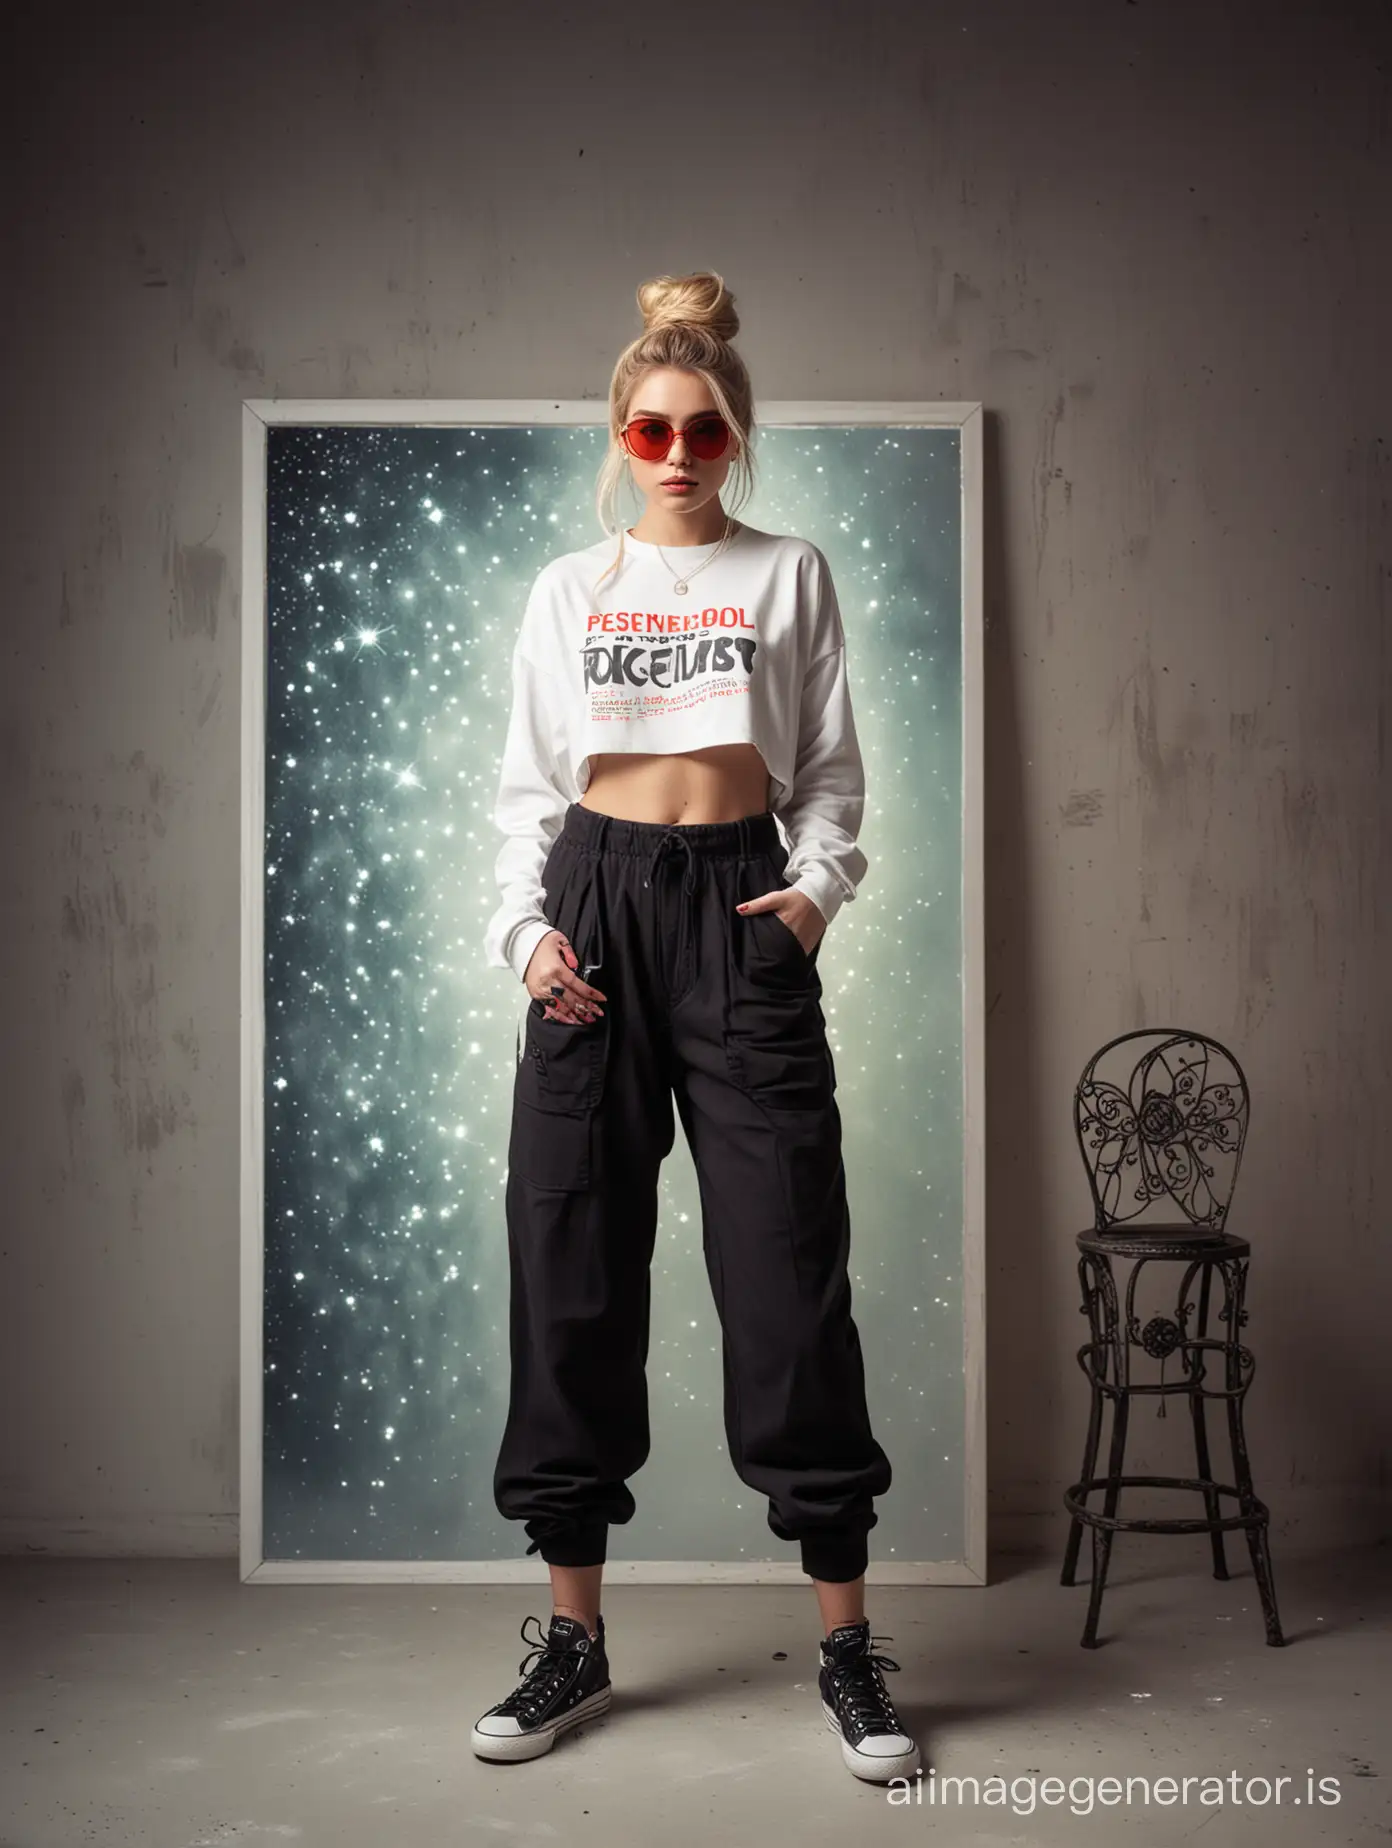 The round black window canvas in the photo studio leans against the wall stands a very beautiful stylish bimbo blond in full height, reflecting red sunglasses, 90s aesthetics, long messy hair bun, filigree tattoo, loose wide pants big pockets, oversized sweatshirt belts harnesses detailed print skull, aesthetics of the female body random angle, full body, drawing with fine diamond gel powder, Polaroid effect, printing, diamond powder, glow, fireflies, white photo filter